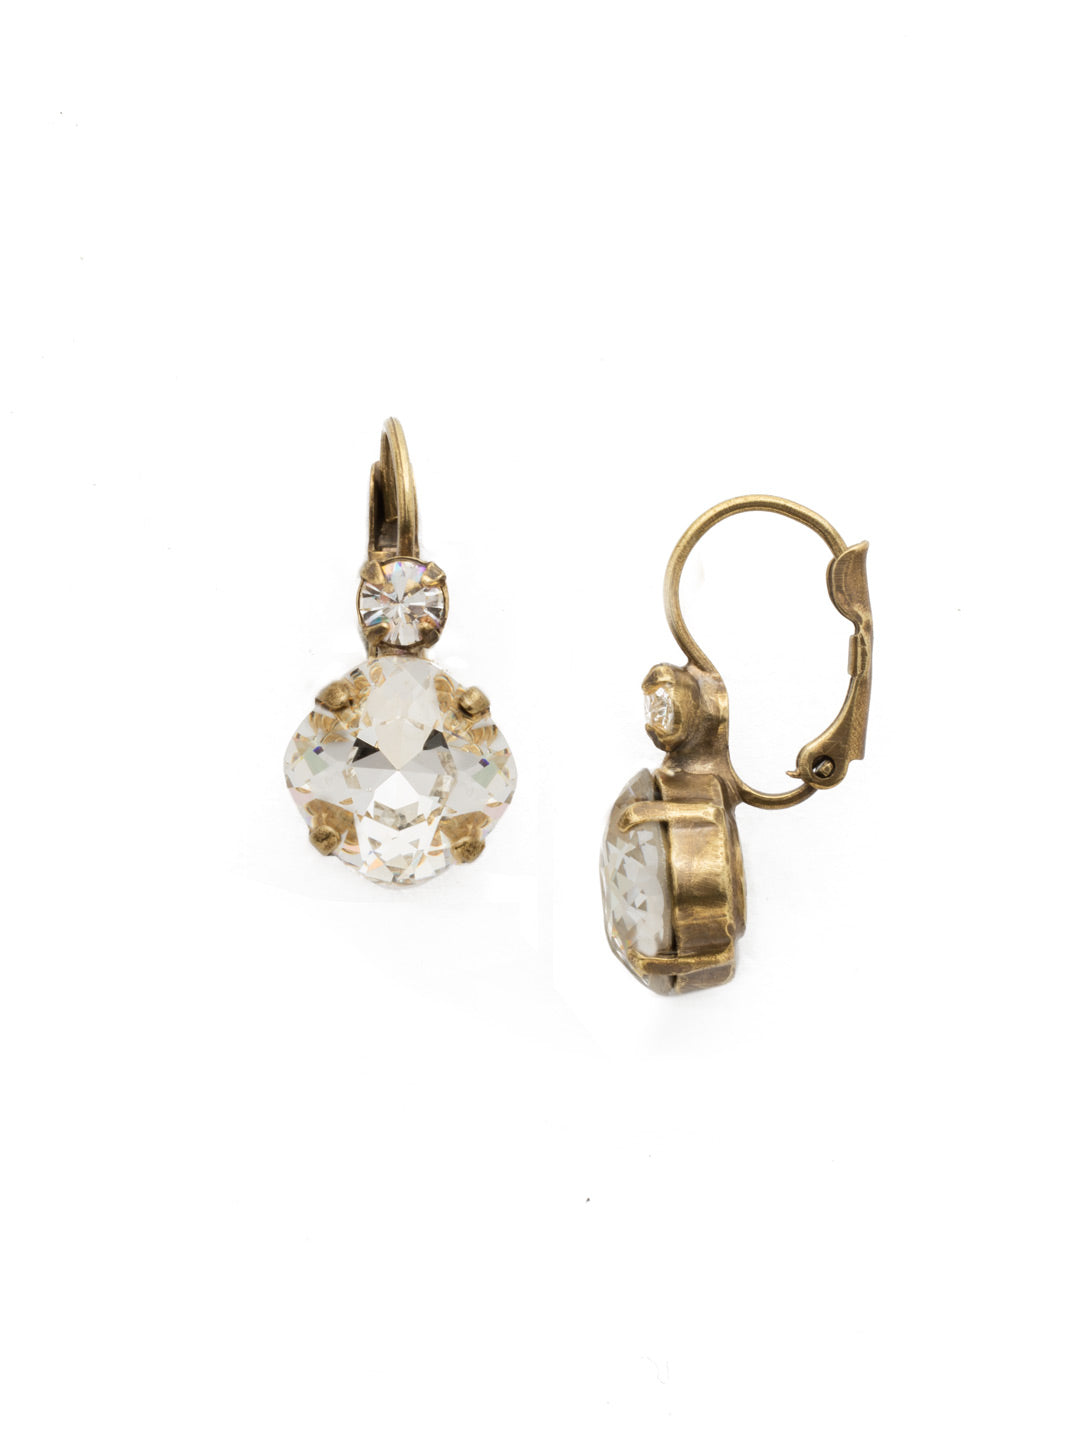 Classic Complements French Wire Earring - EDN68AGCRY - <p>A small but dazzling round crystal is the perfect complement to its cushion cut counterpart. A must-have earring for those who appreciate classic styling. From Sorrelli's Crystal collection in our Antique Gold-tone finish.</p>